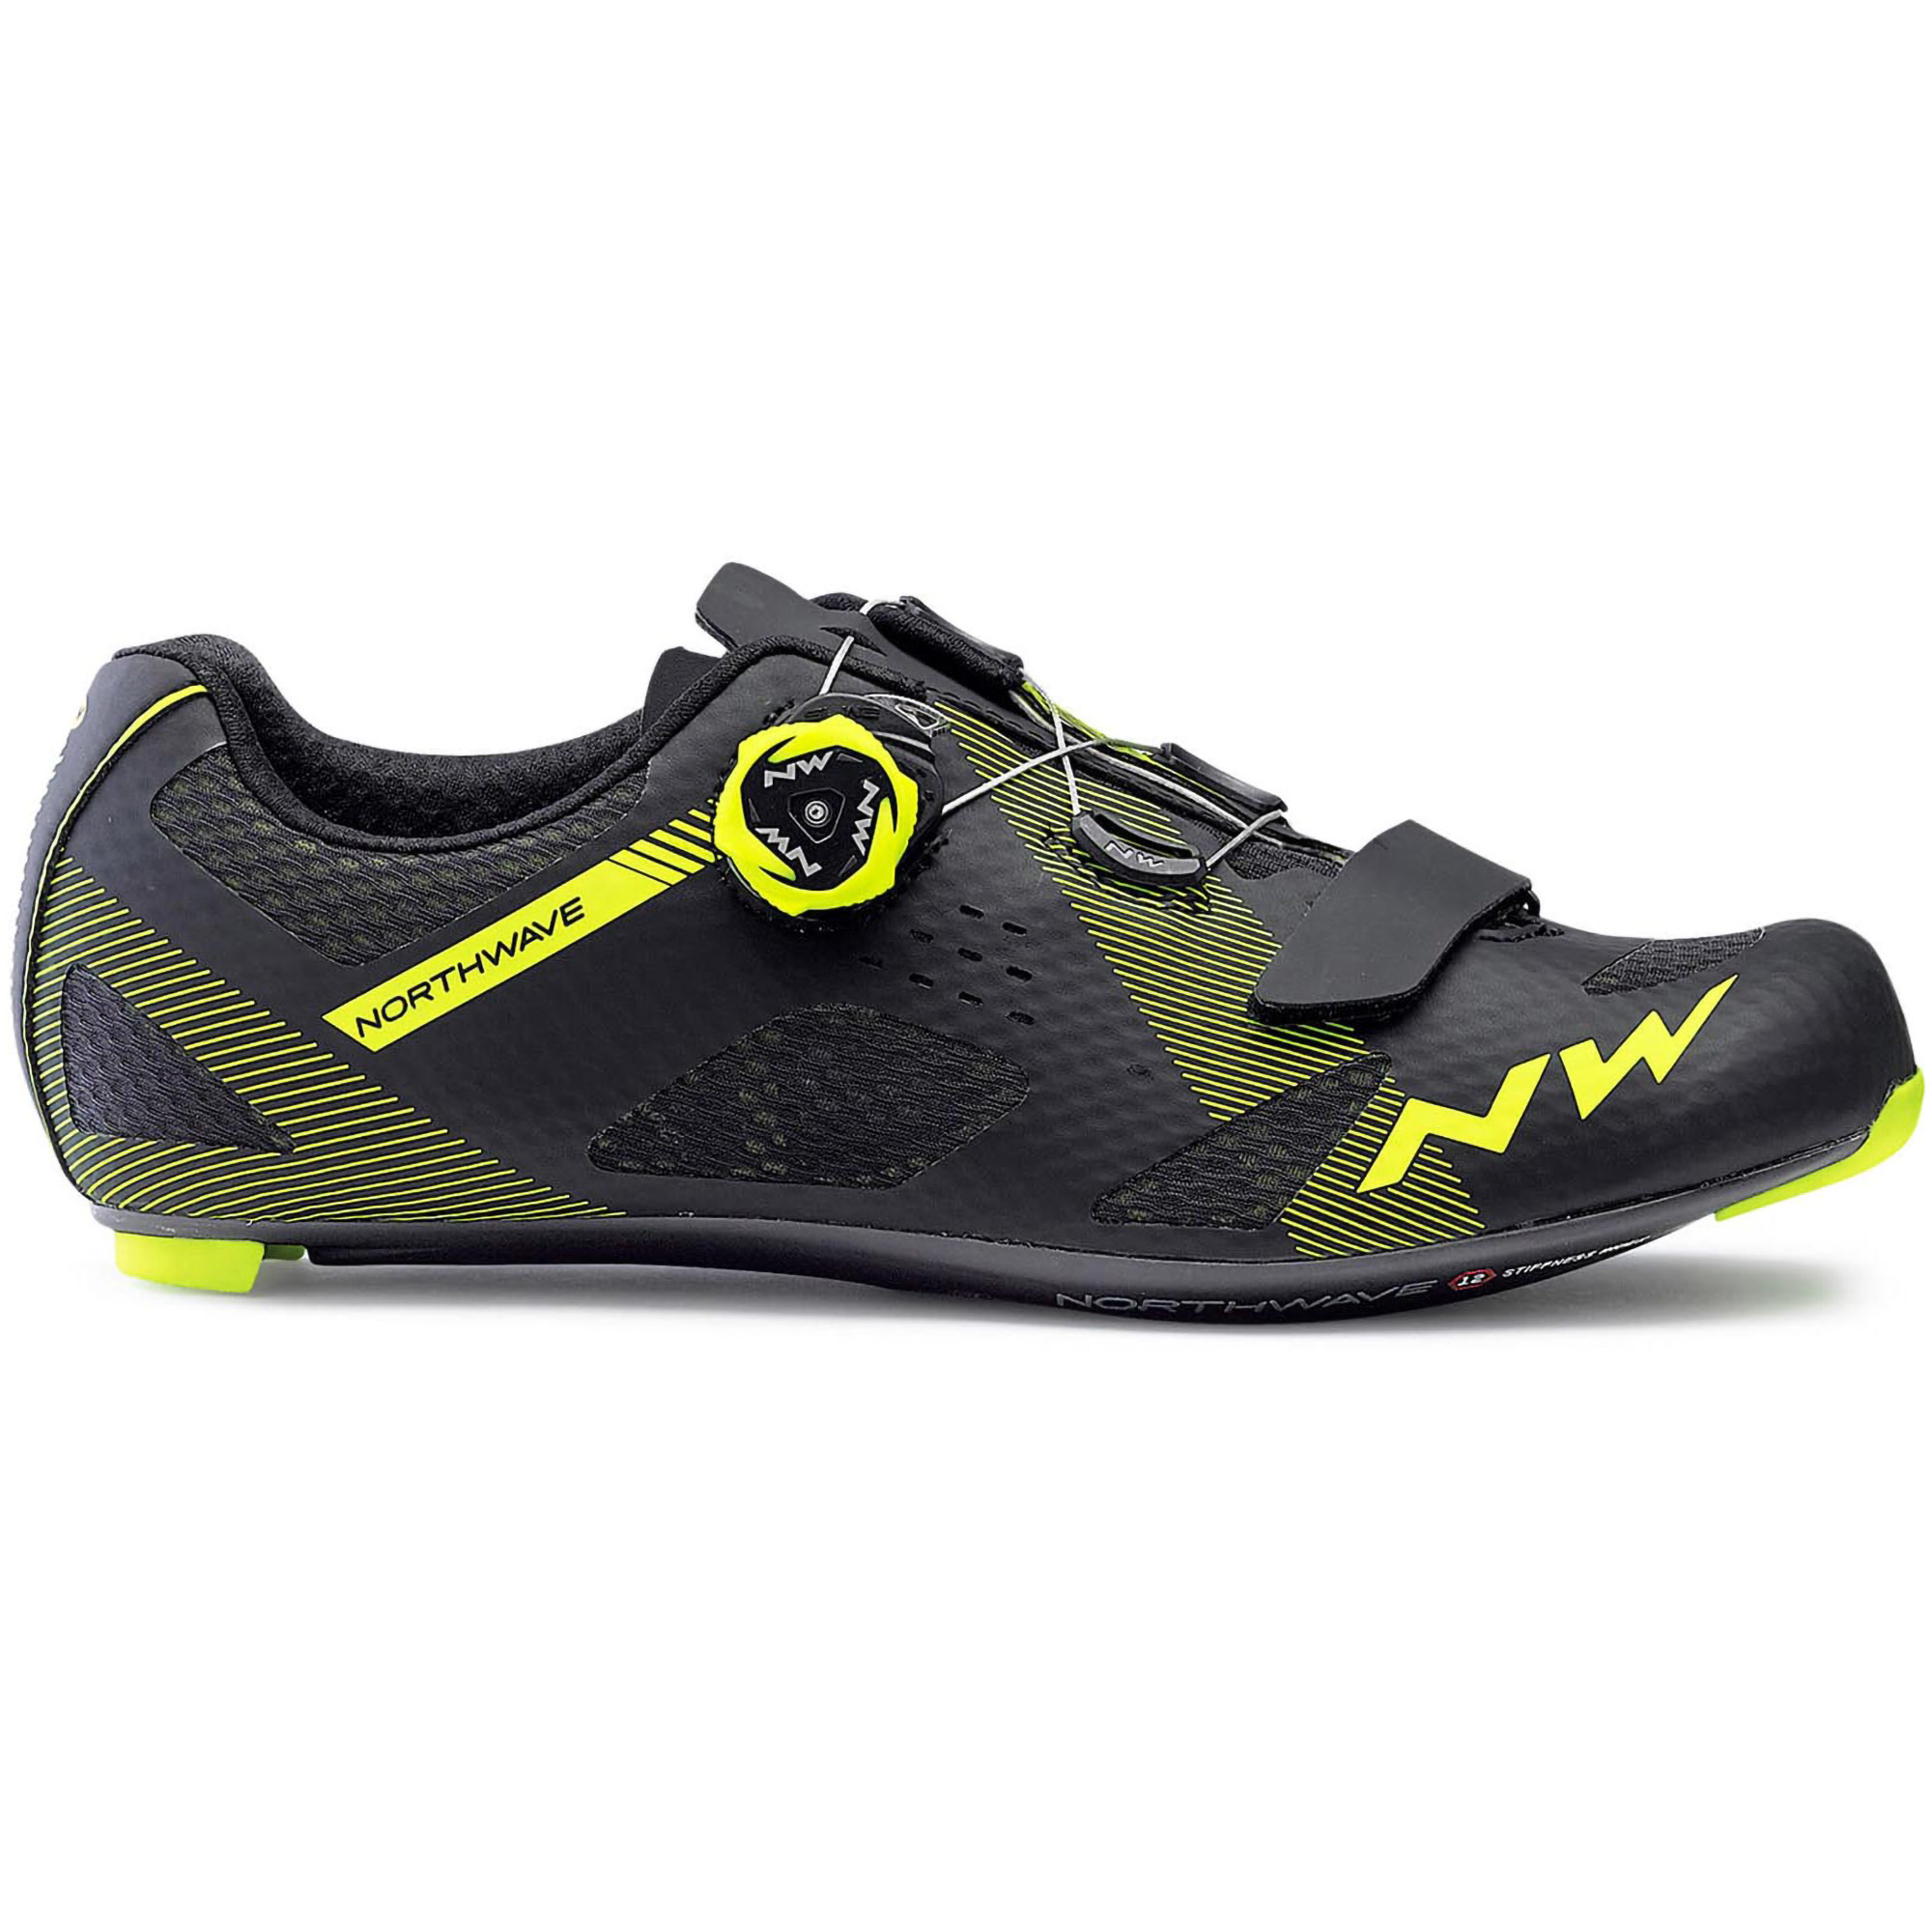 Northwave Storm Carbon Road Cycling Bike Shoes eBay